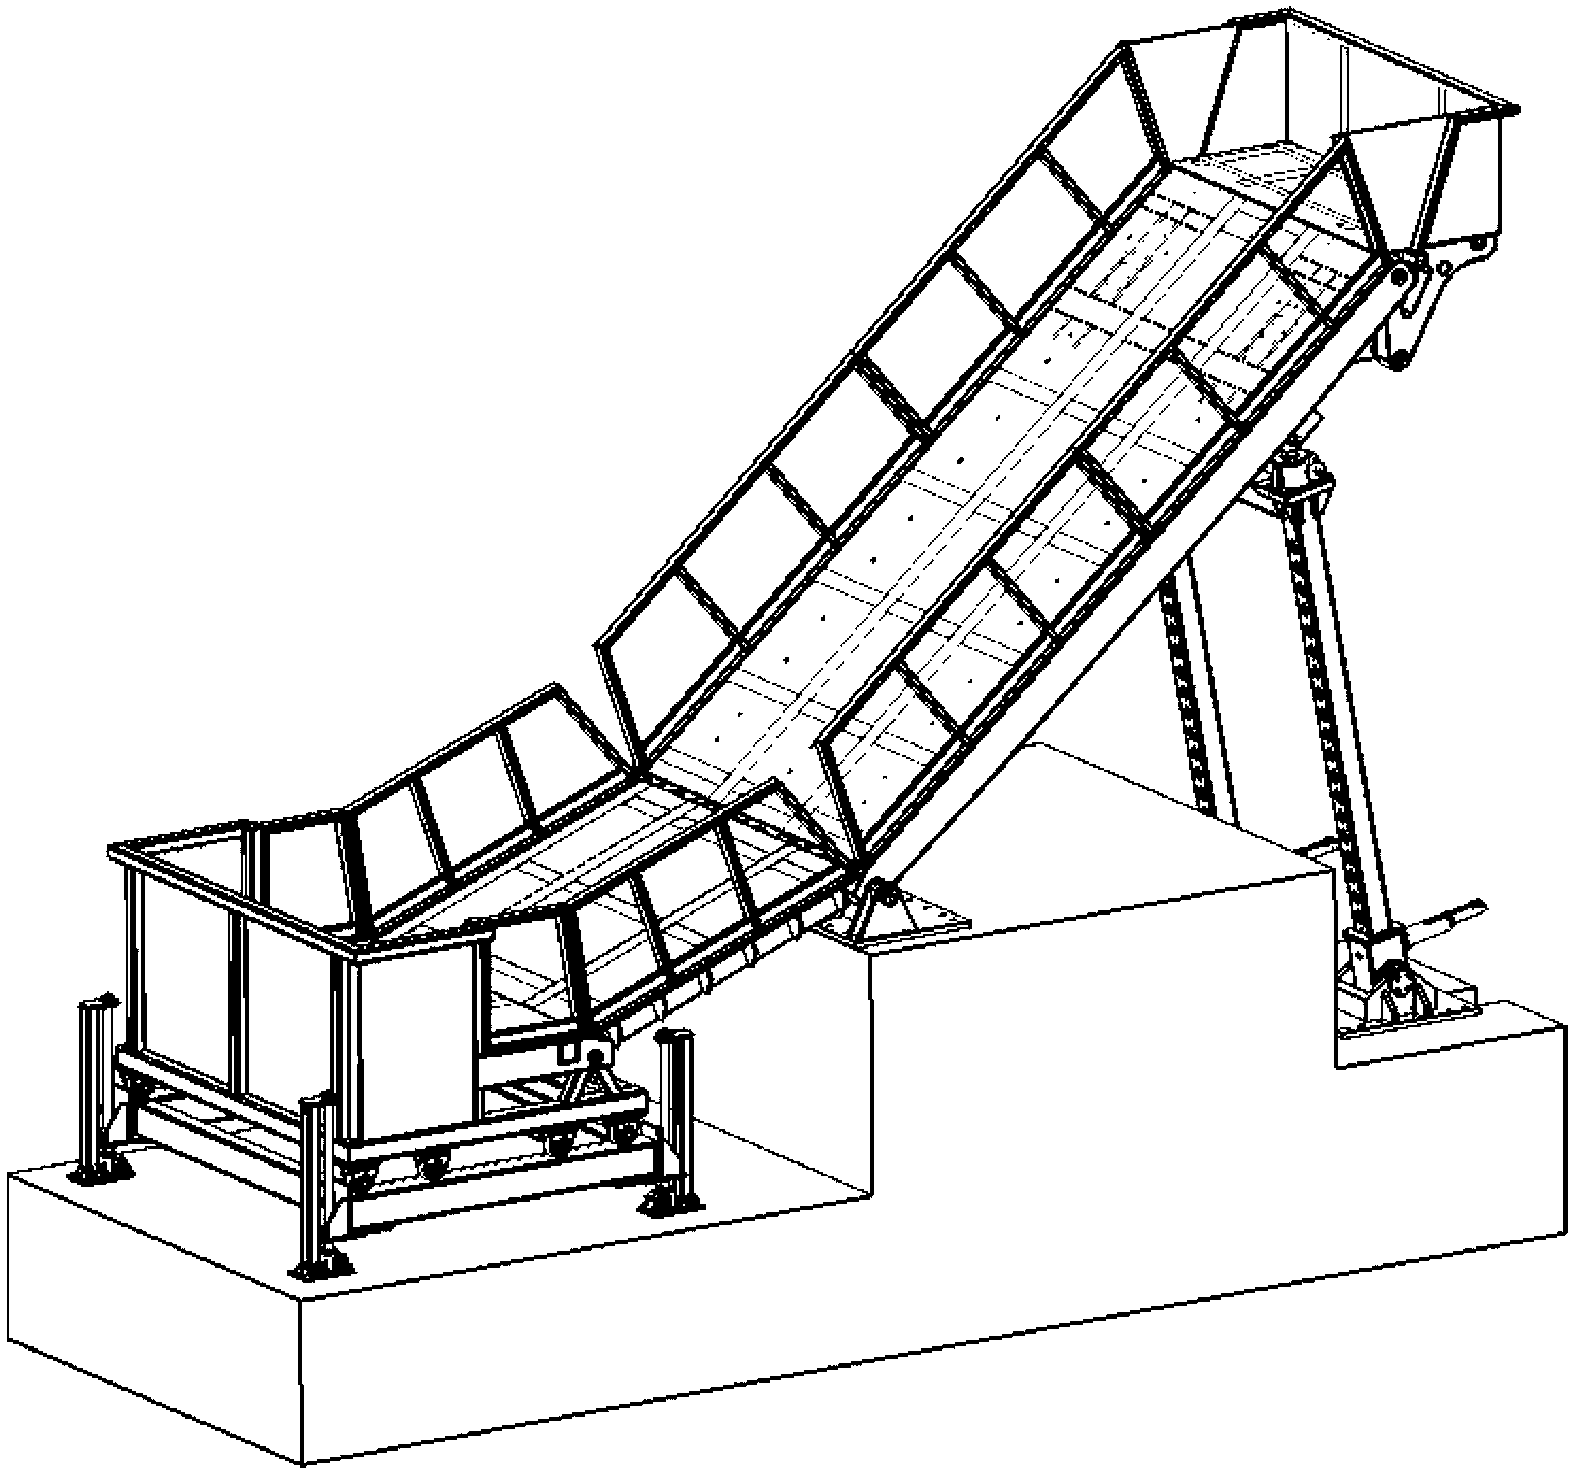 Experimental device with physical landslide model